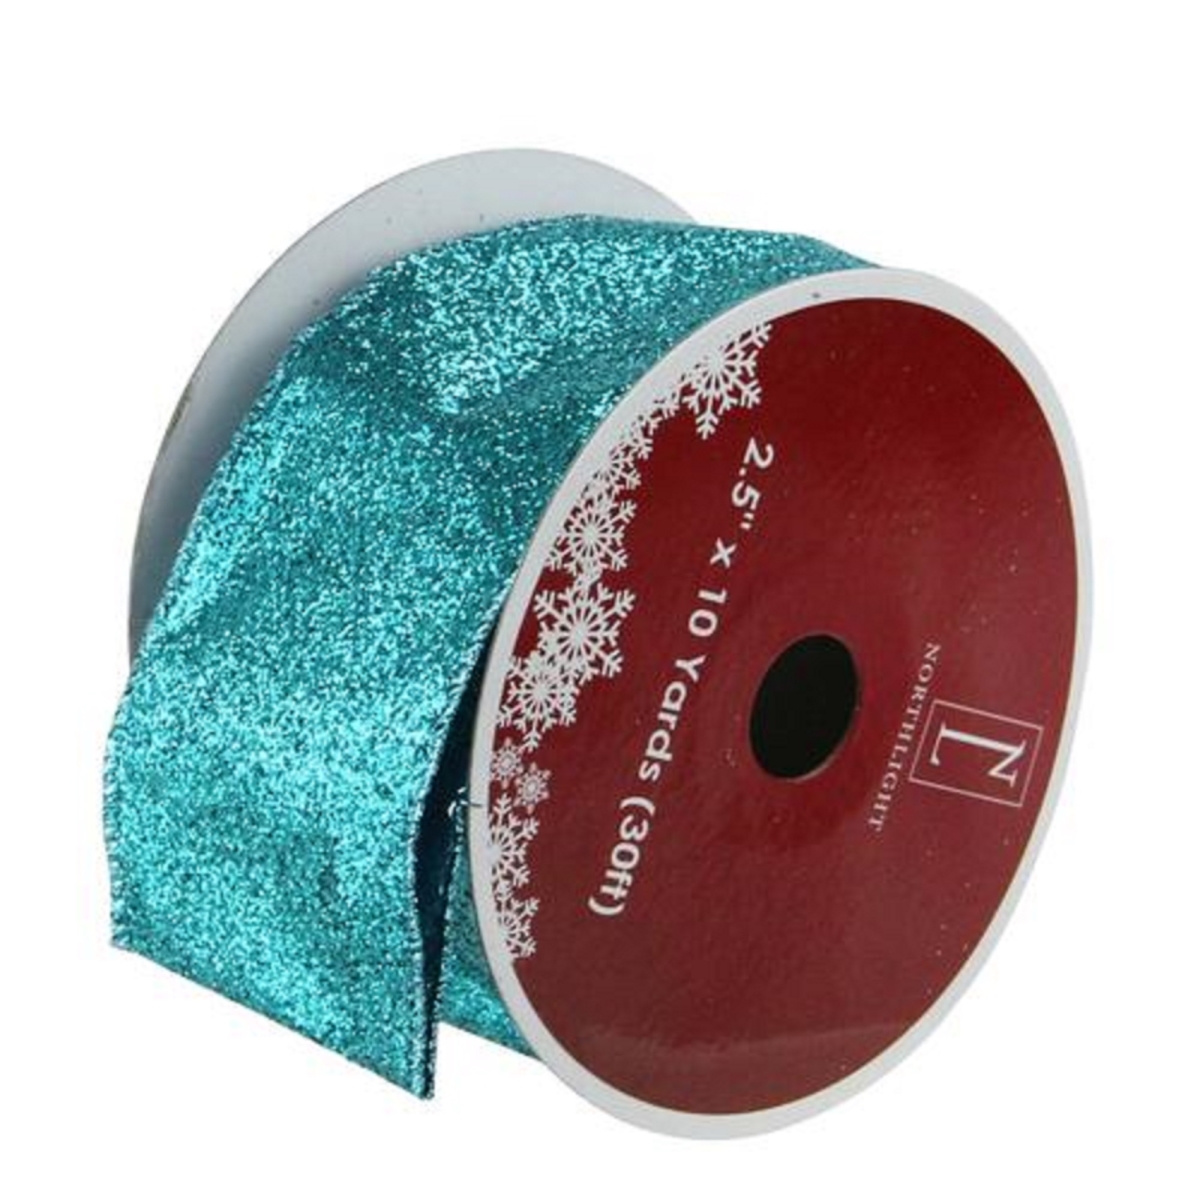 Picture of Northlight 32620340 2.5 in. x 10 Yard Shimmering Teal Solid Wired Christmas Craft Ribbon